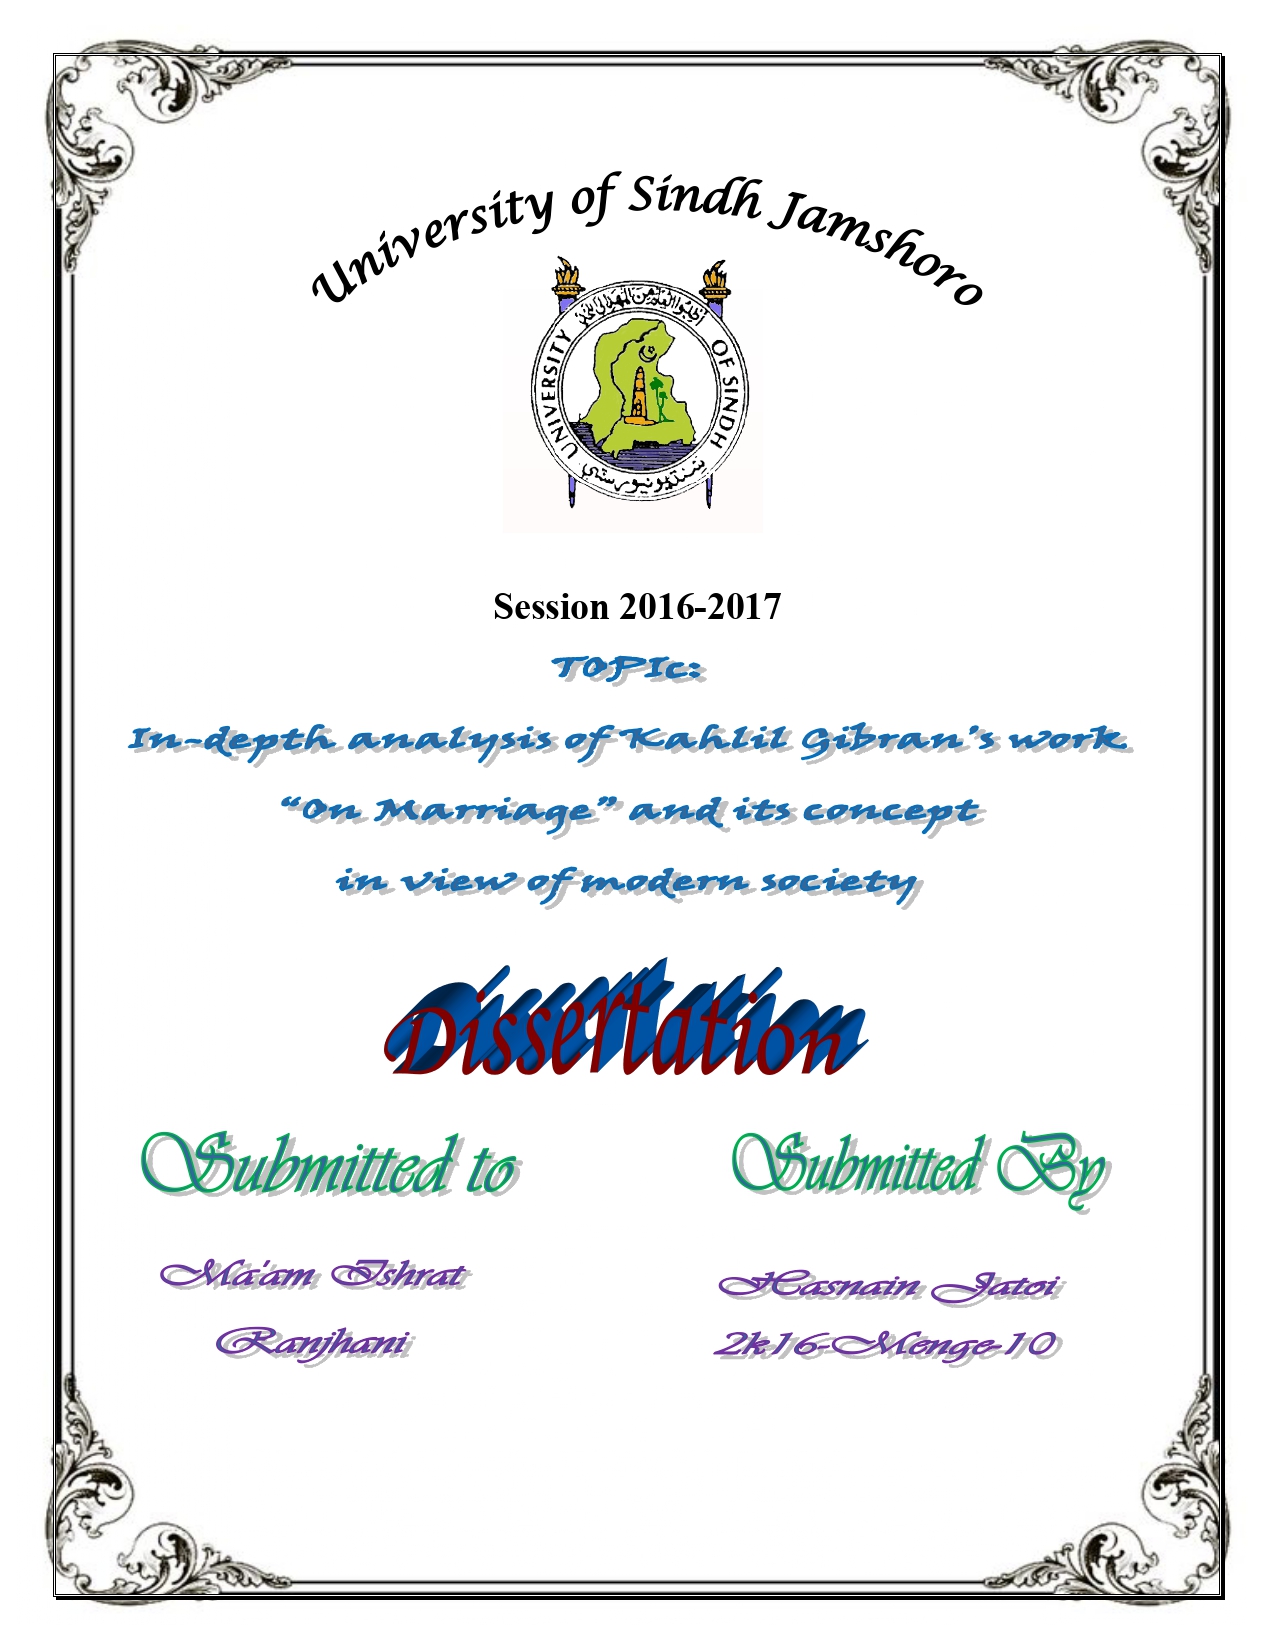 Hasnain Jatoi, "In-depth analysis of Kahlil Gibran’s work 'On Marriage' and its concept in view of modern society", Dissertation, University of Sindh Jamshoro, Sessione 2016-2017.